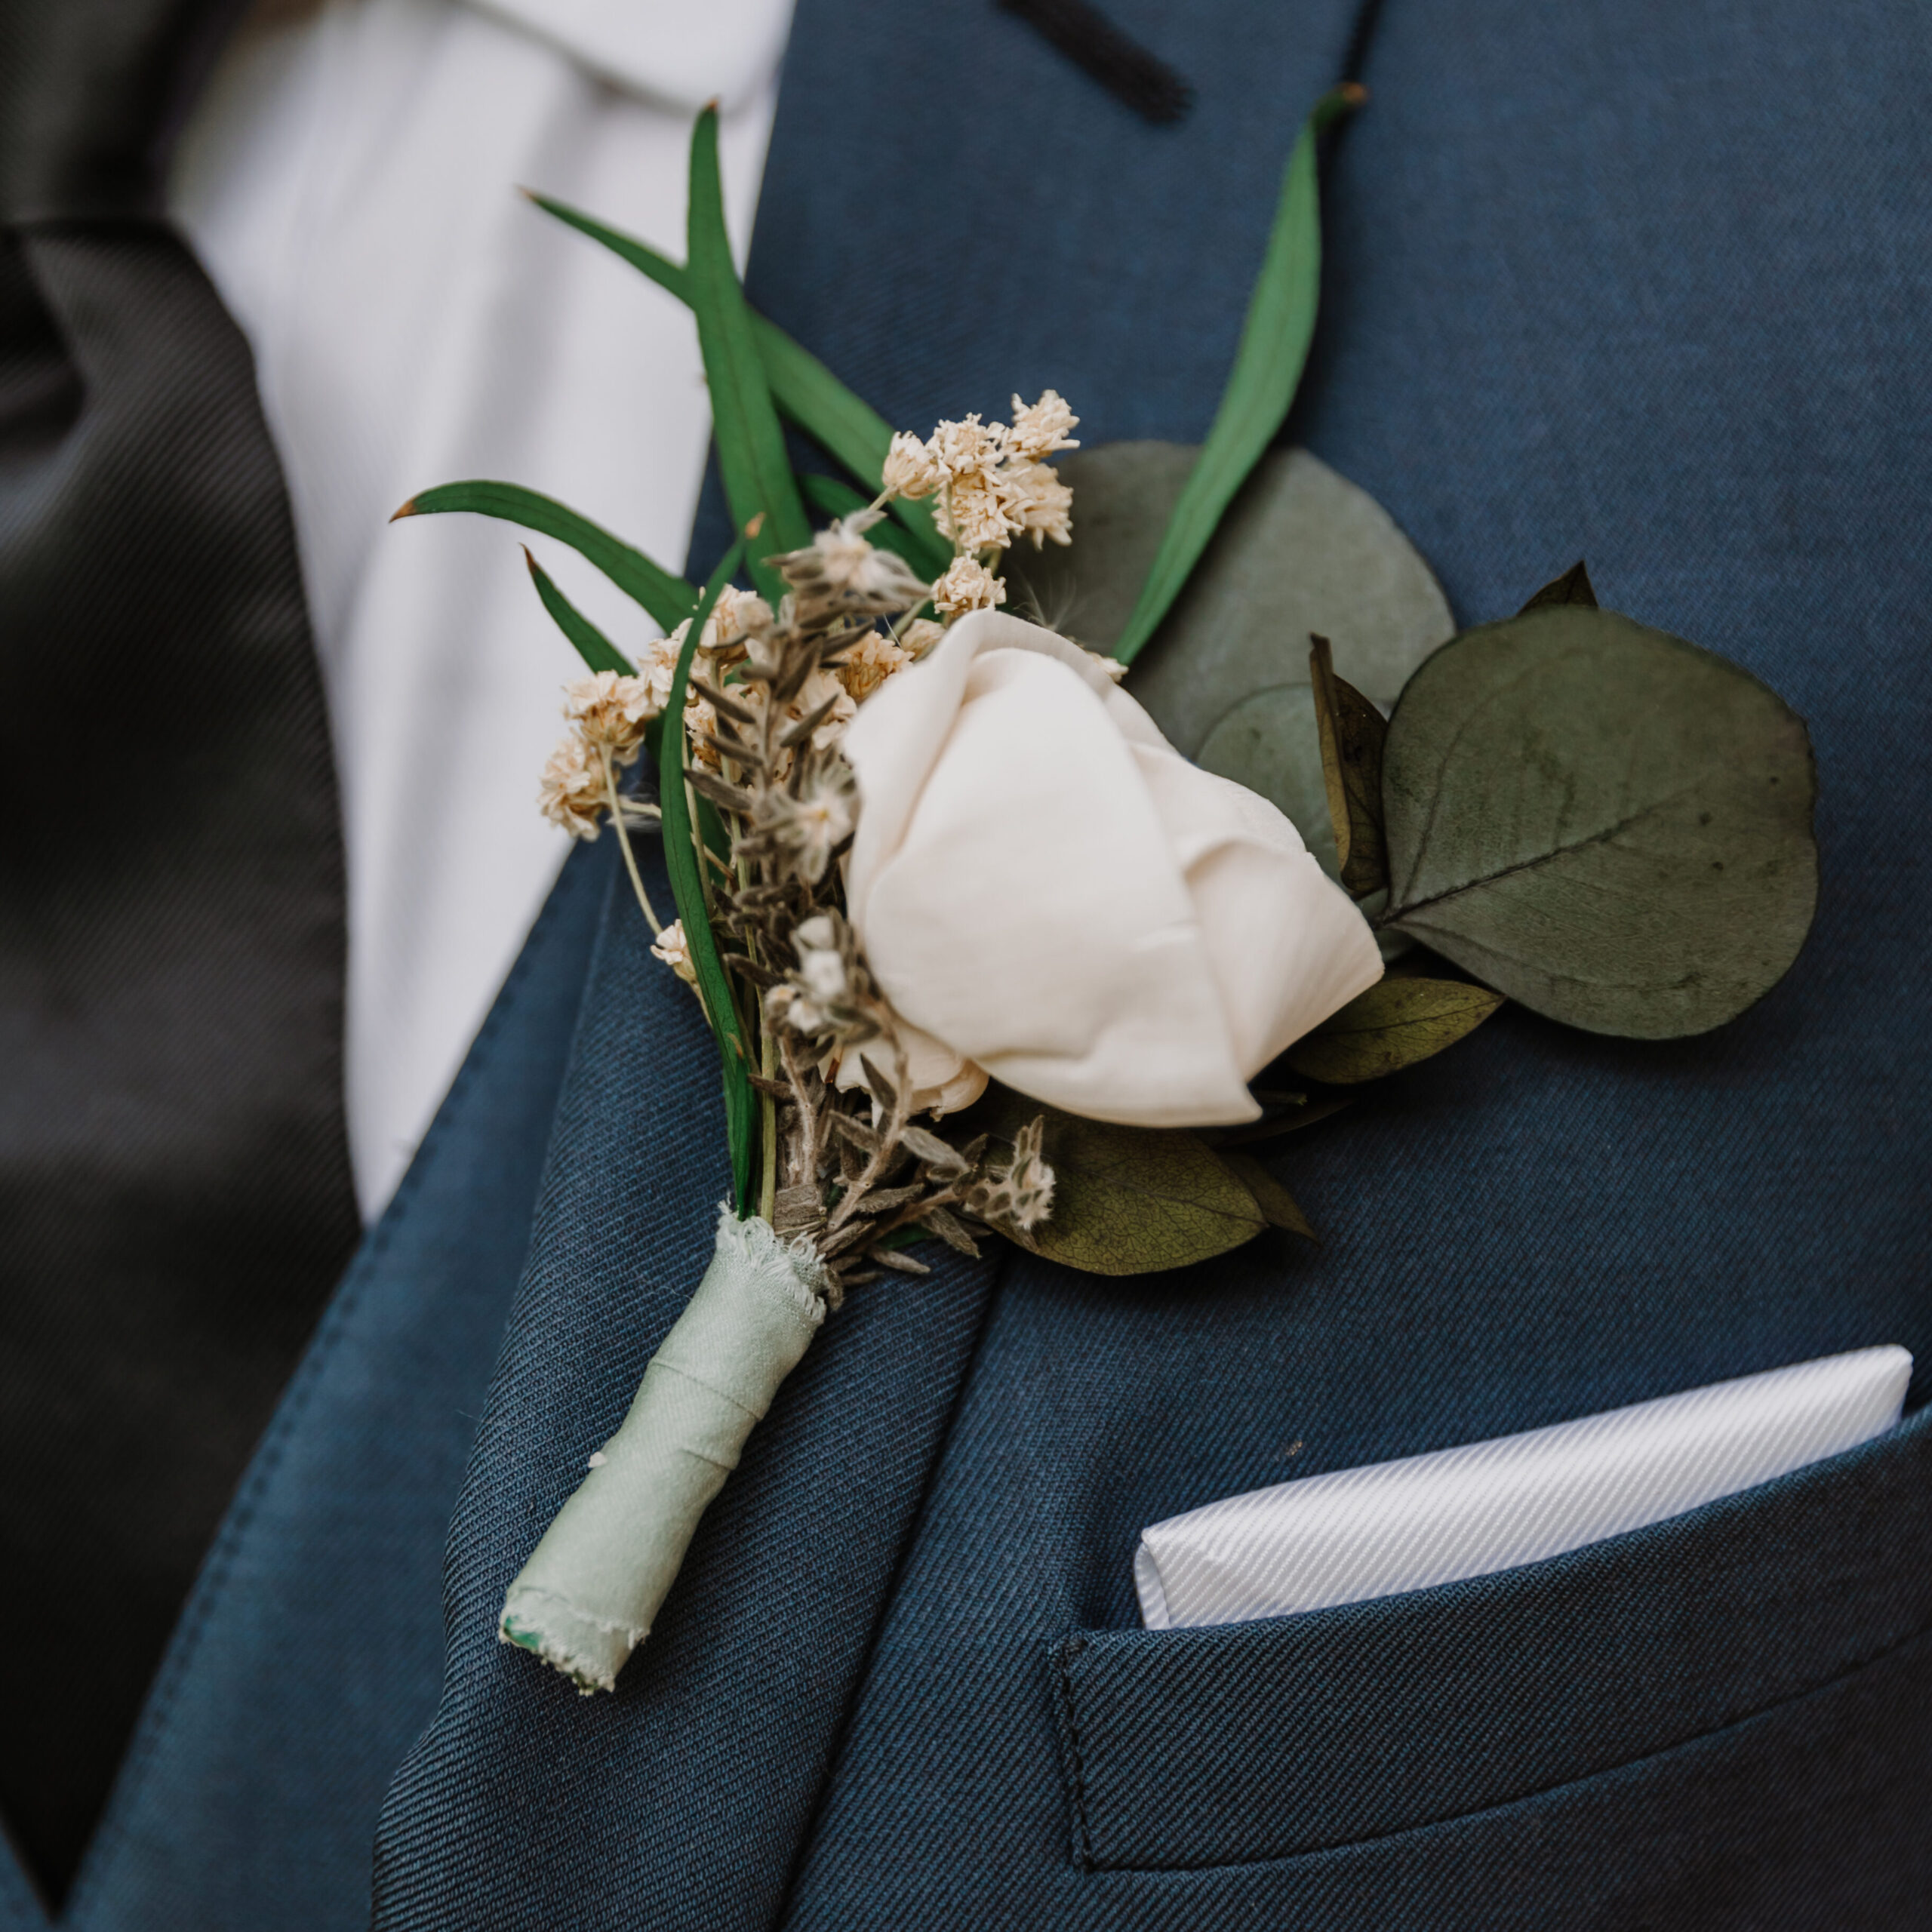 Detail shot of a Groom's boutonniere mad of one small spray rose and dried greenery.